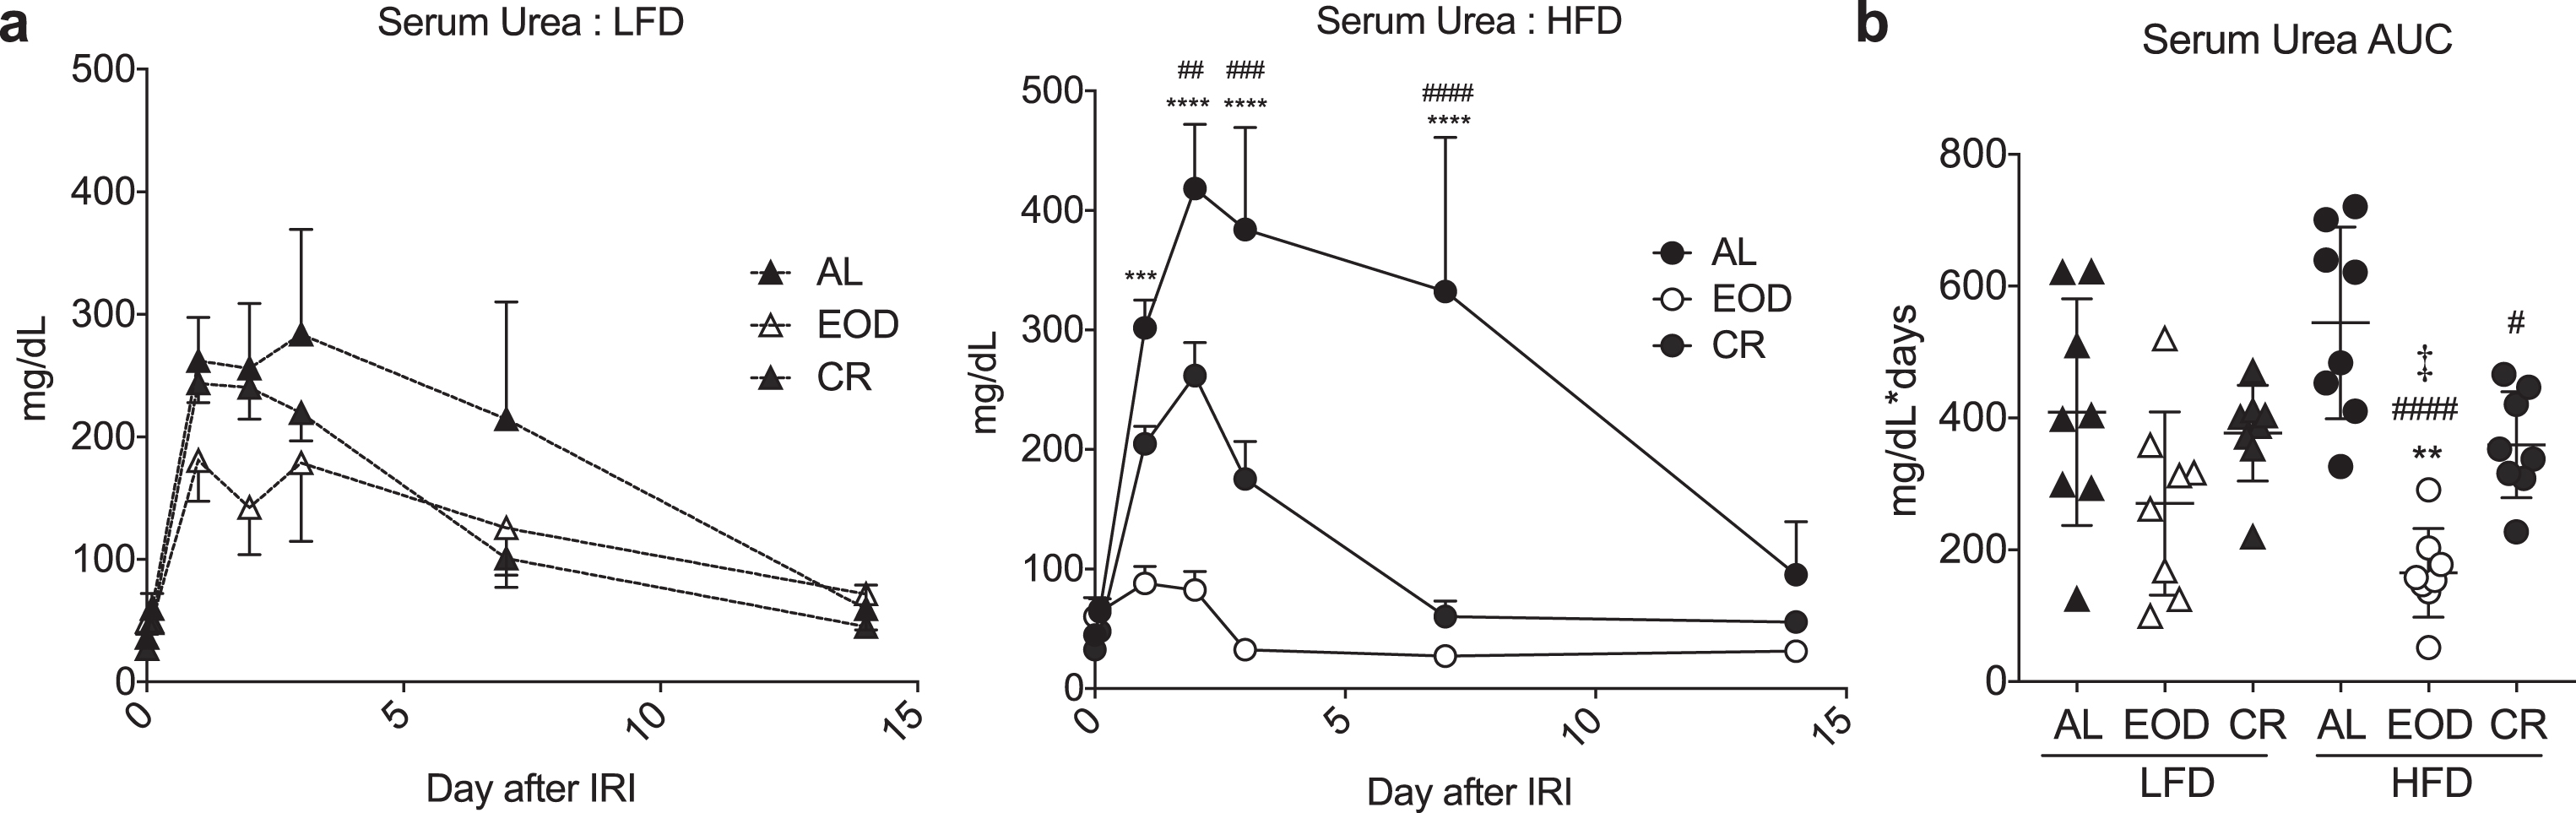 Effects of intermittent fasting on resistance to renal ischemia reperfusion injury. (a-b) Serum urea over the first 14 days (a) and AUC (b) following renal ischemia reperfusion injury in mice preconditioned for 6 weeks on the indicated diet and returned to AL LFD after surgery. (a) Asterisk: AL vs. EOD; pound sign: AL vs. CR within diet group using repeated measures two-way ANOVA with a Dunnett’s post-hoc test. (b) Asterisks: comparison of all groups to AL LFD; pound sign: comparison of HFD groups to AL HFD; double cross: comparison between EOD and CR within HFD using one-way ANOVA with a Sidak’s post-hoc test; #/‡P < 0.05, **/# #P < 0.01, ***/# # #P < 0.001, ***/# # # #P < 0.0001. All data are expressed as mean±SD.